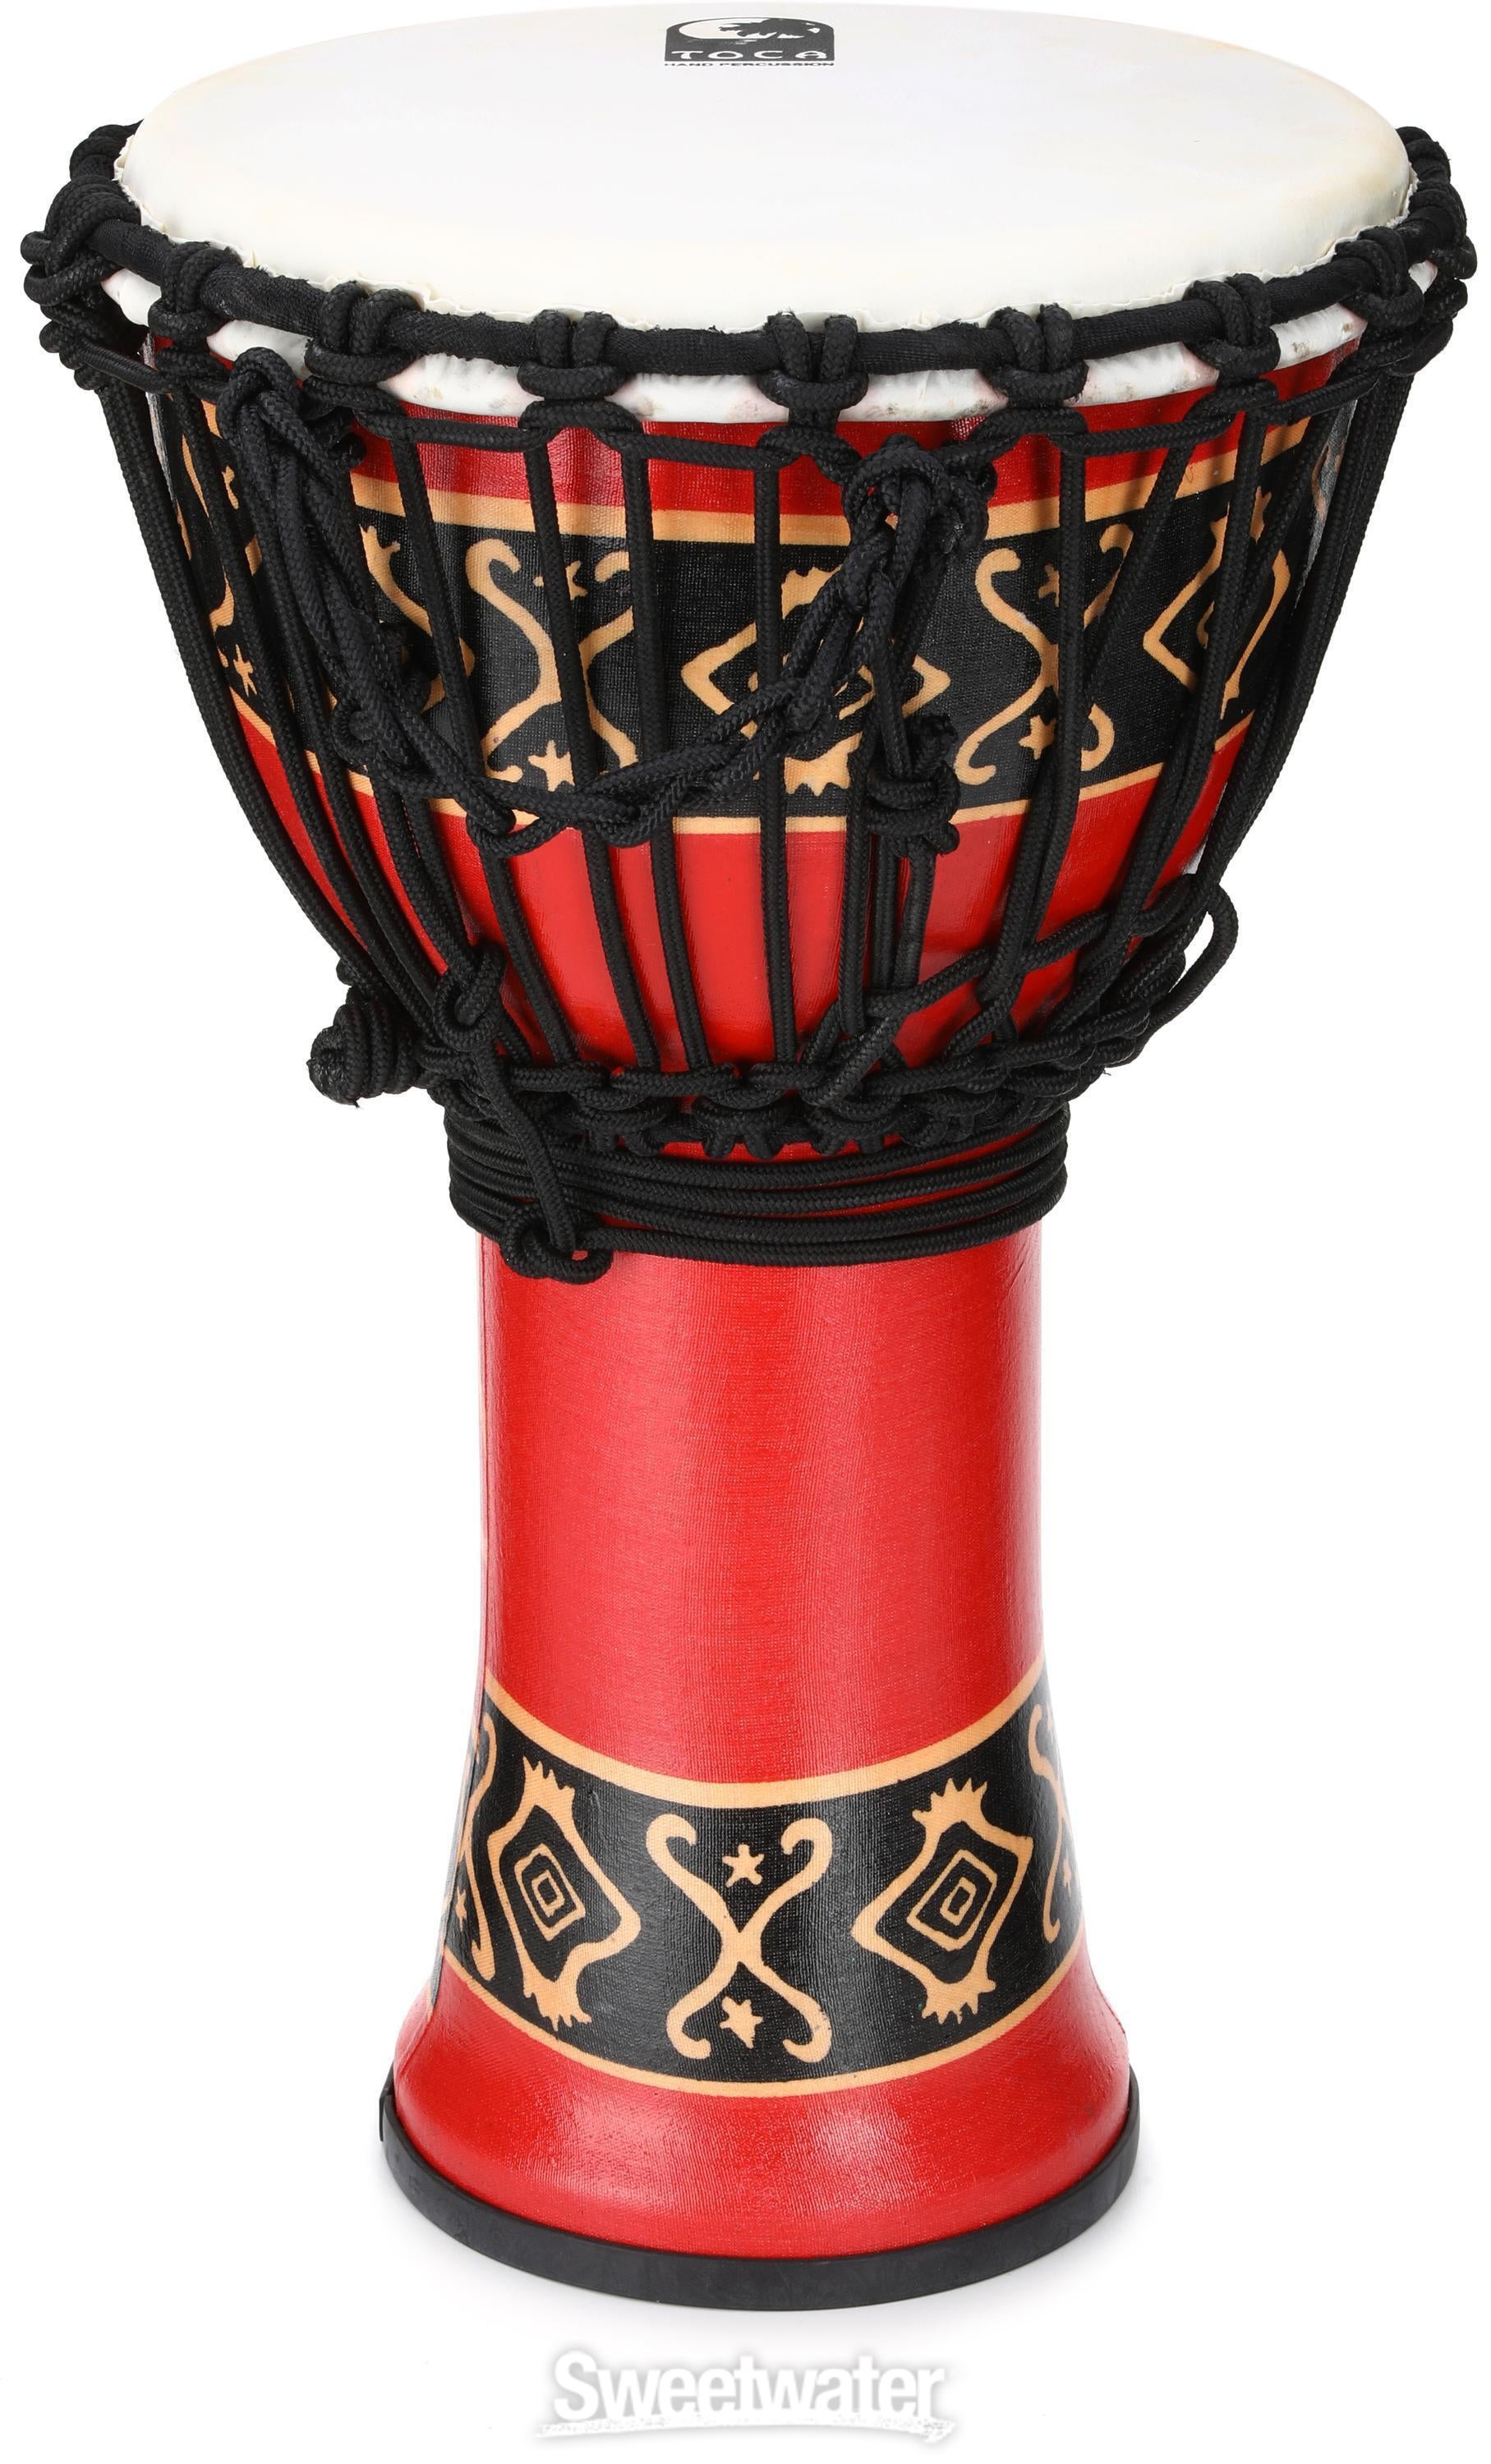 Toca Percussion Freestyle Rope-tuned Djembe - Bali Red | Sweetwater